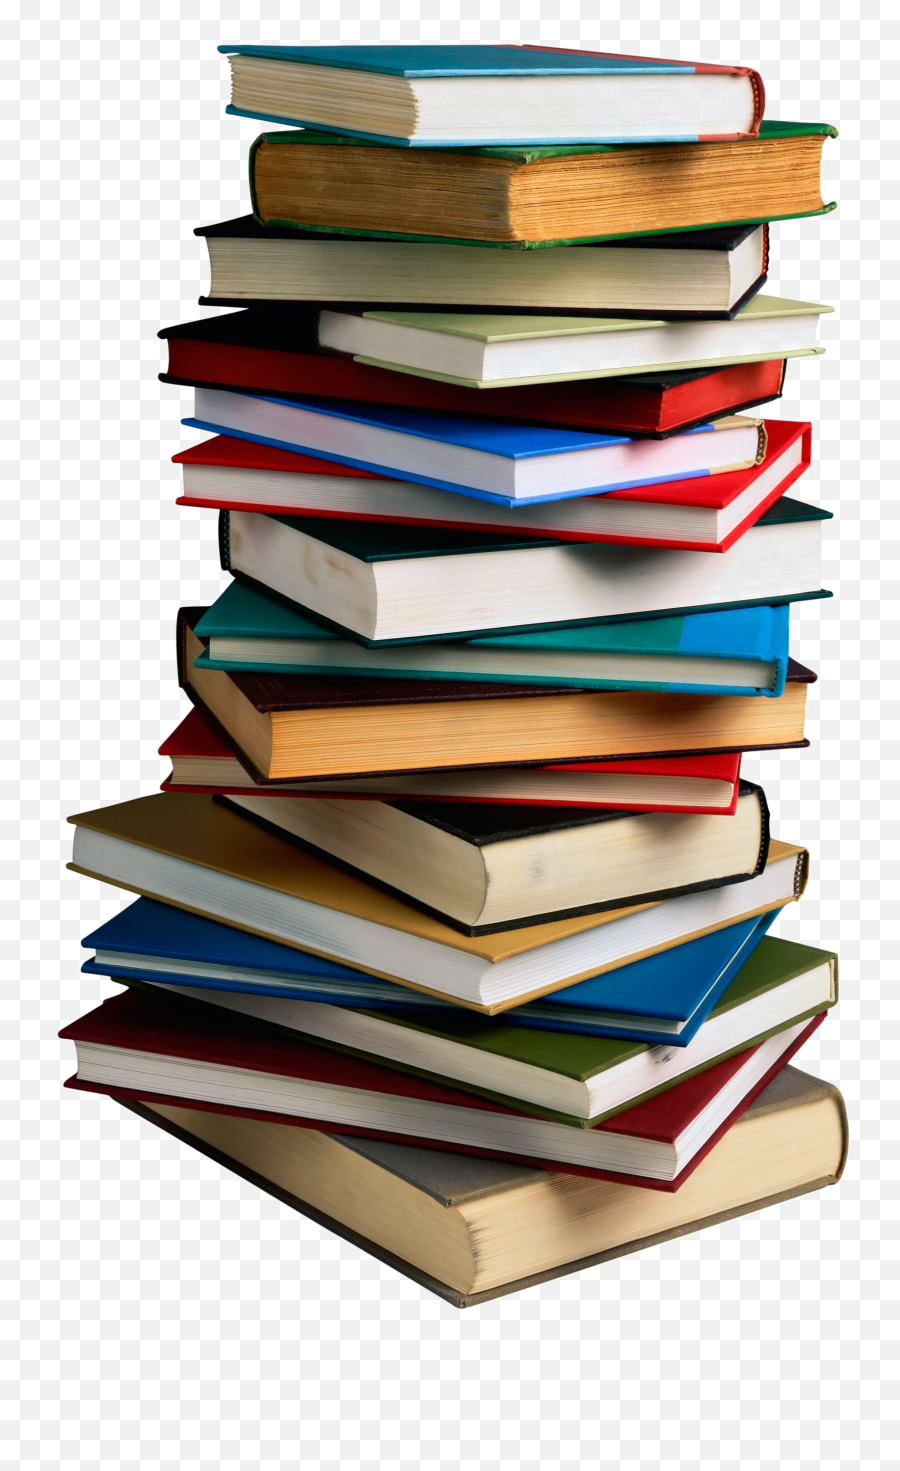 Download Book Png Image - Stack Of Books,Books Transparent Background